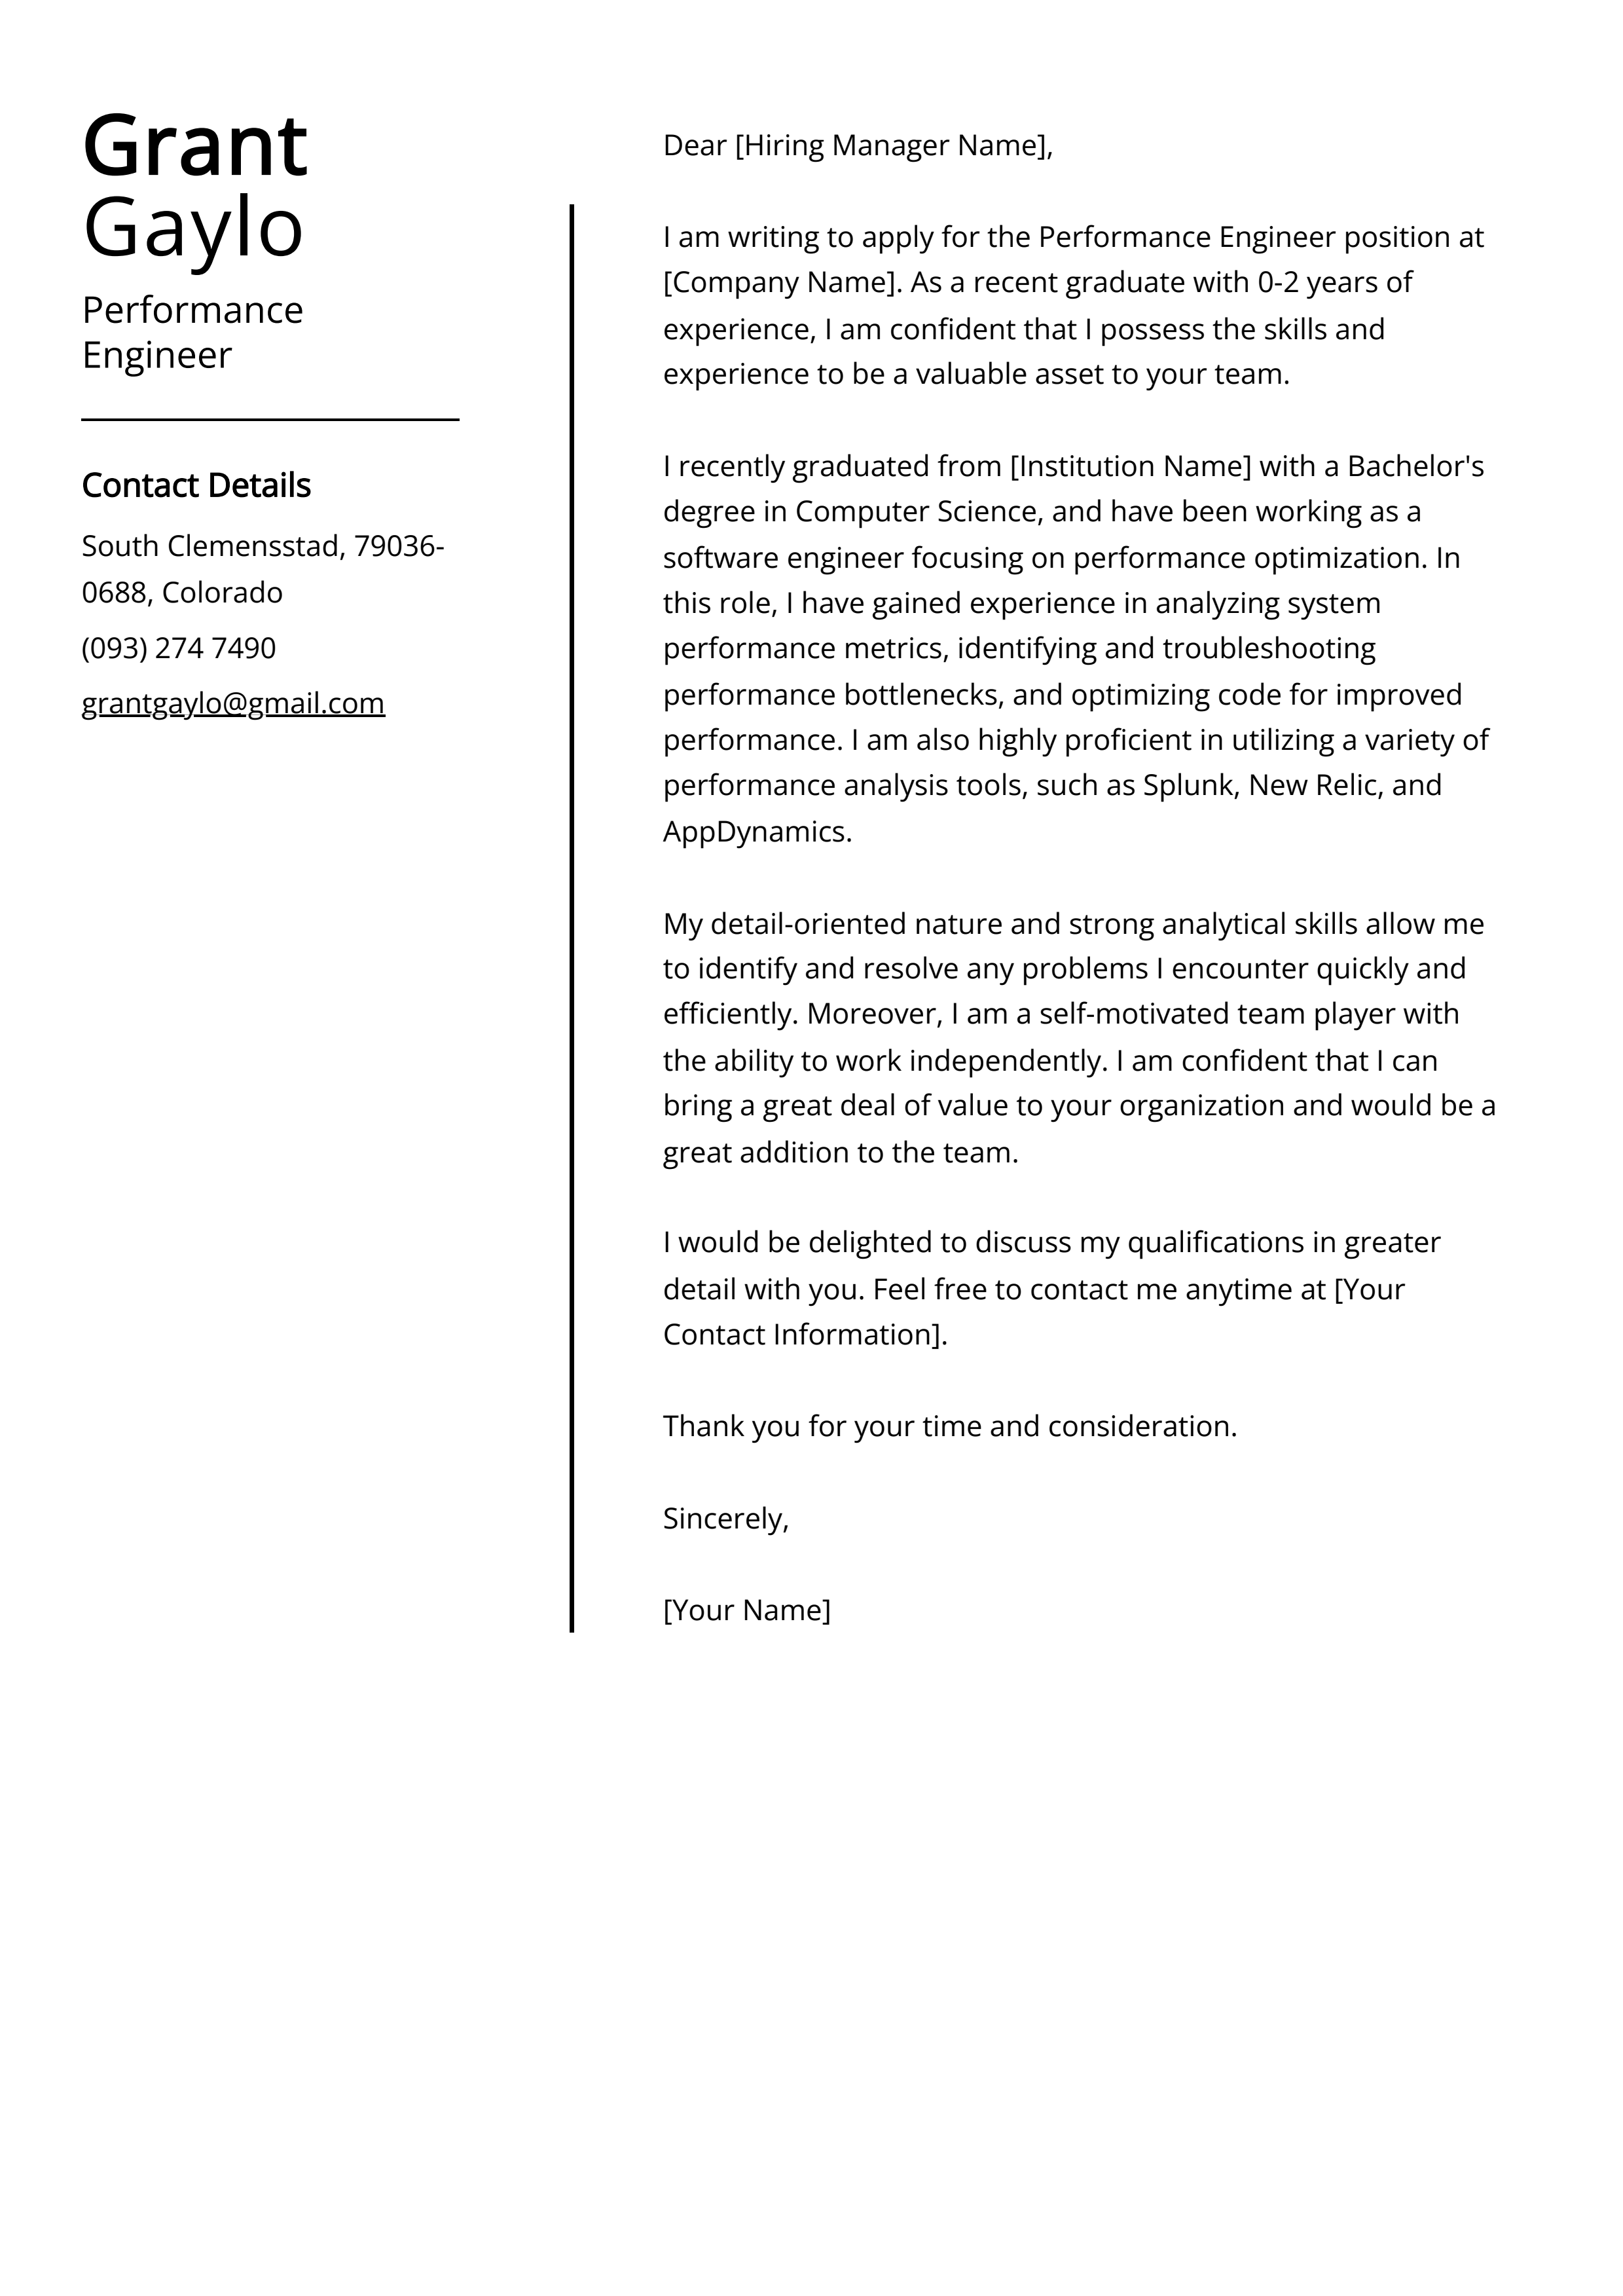 Performance Engineer Cover Letter Example